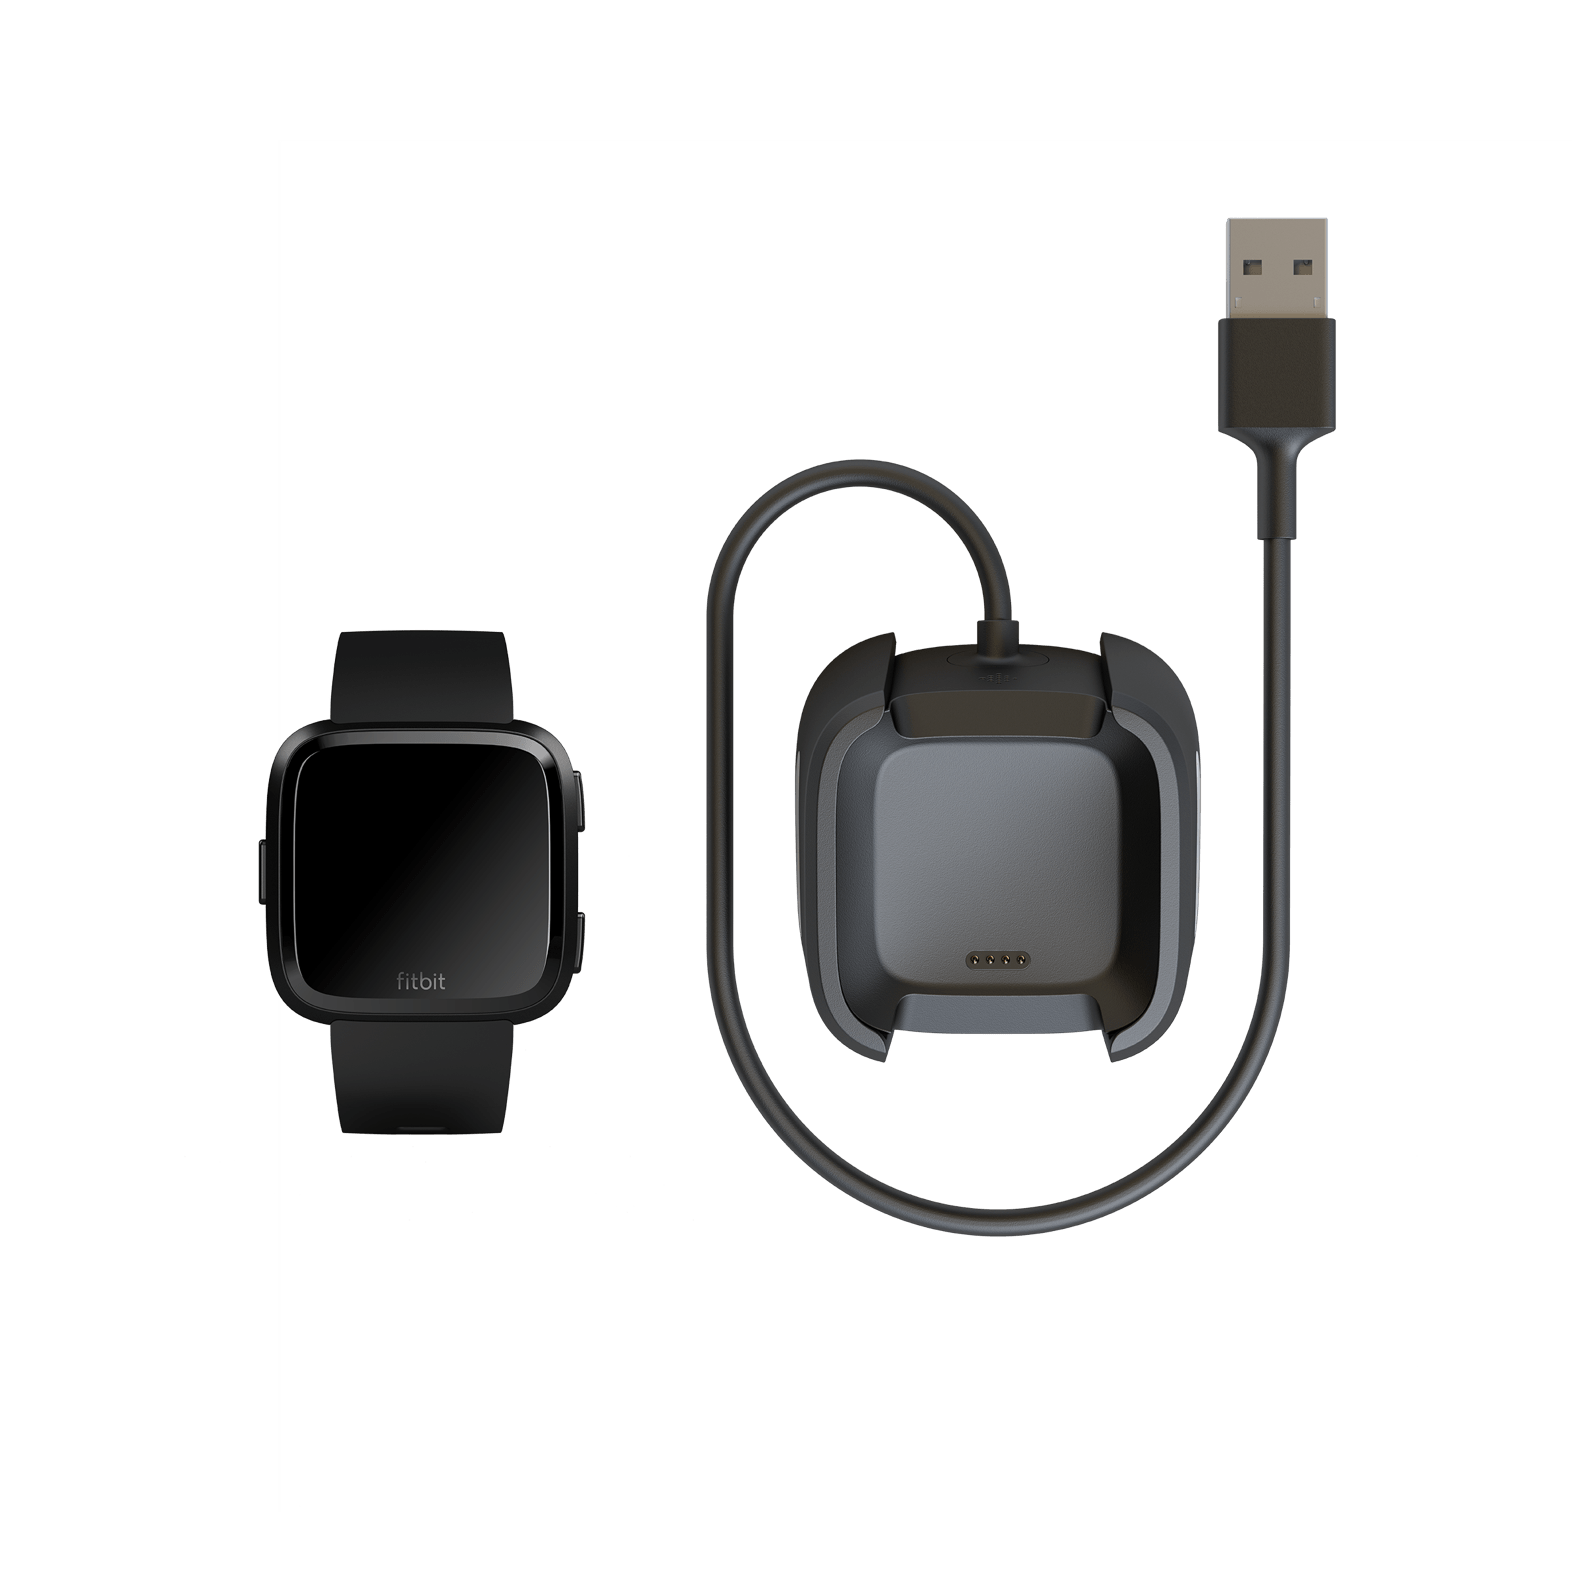 versa lite fitbit charger